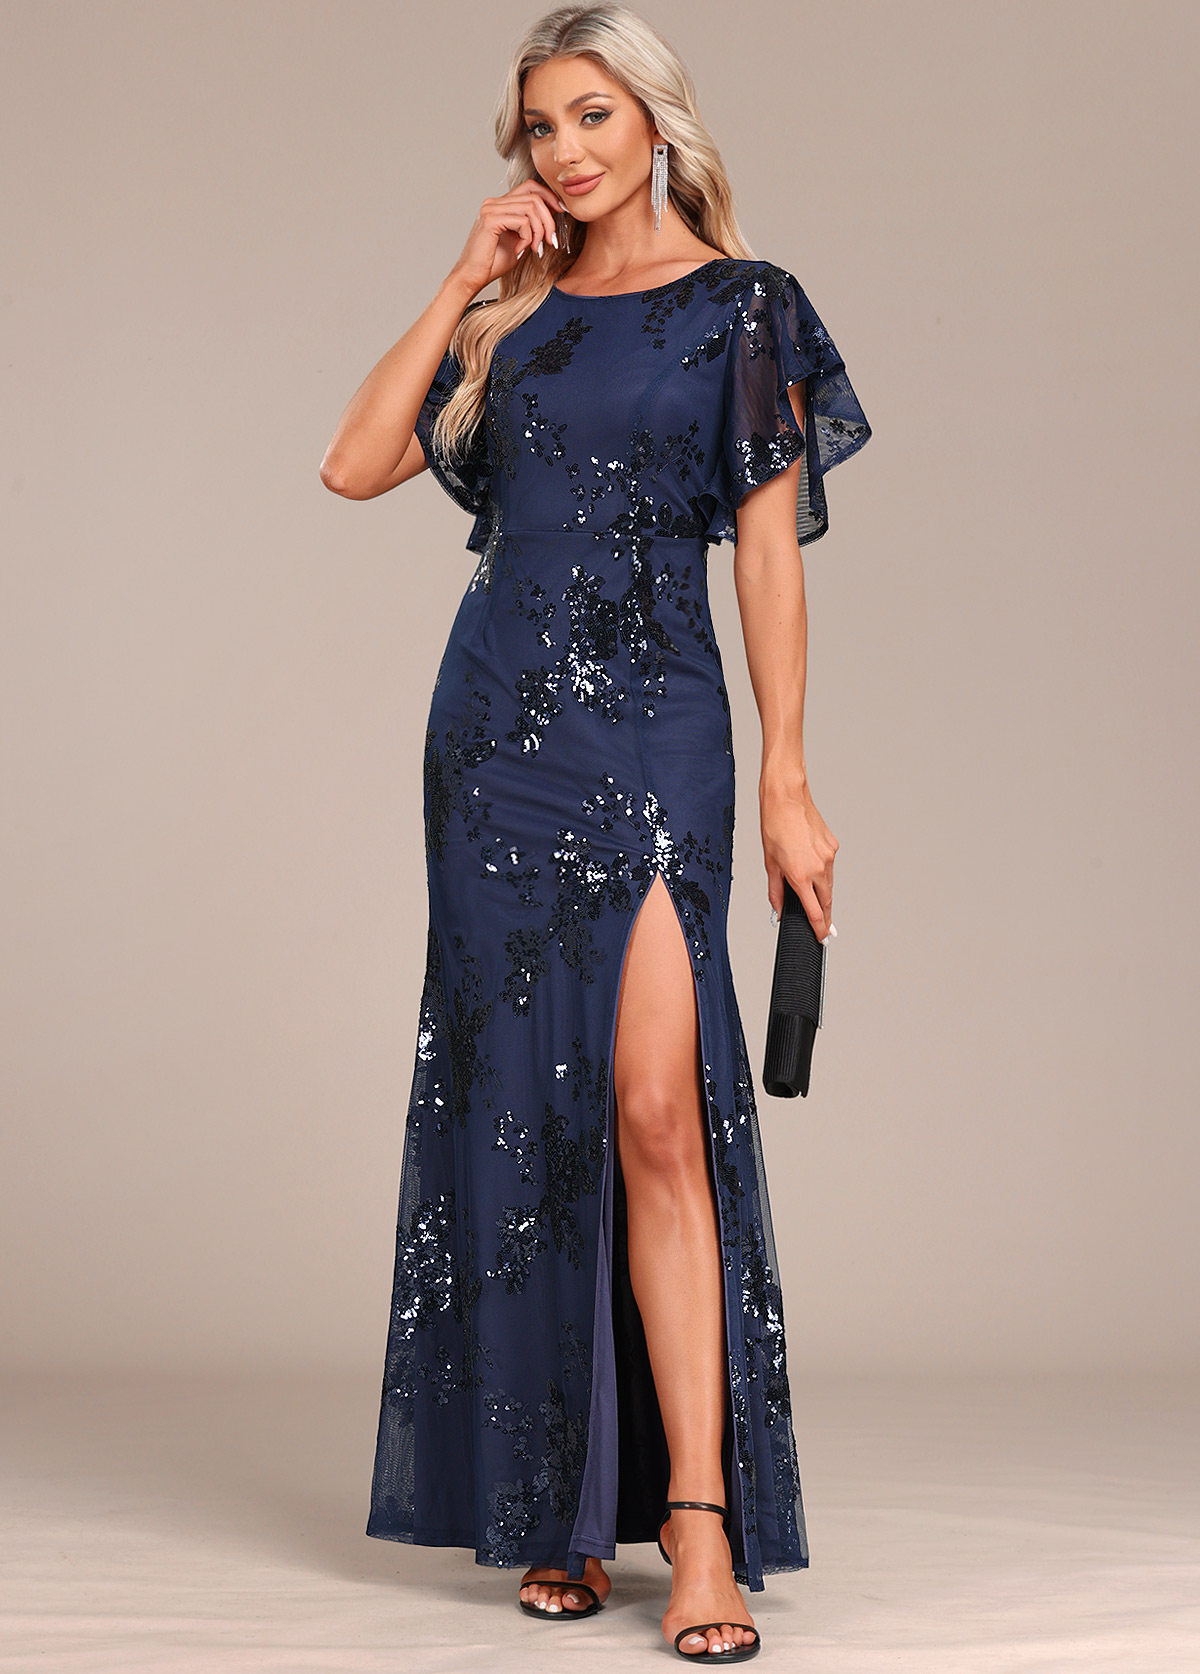 Sequin Lace Navy Round Neck Maxi Dress